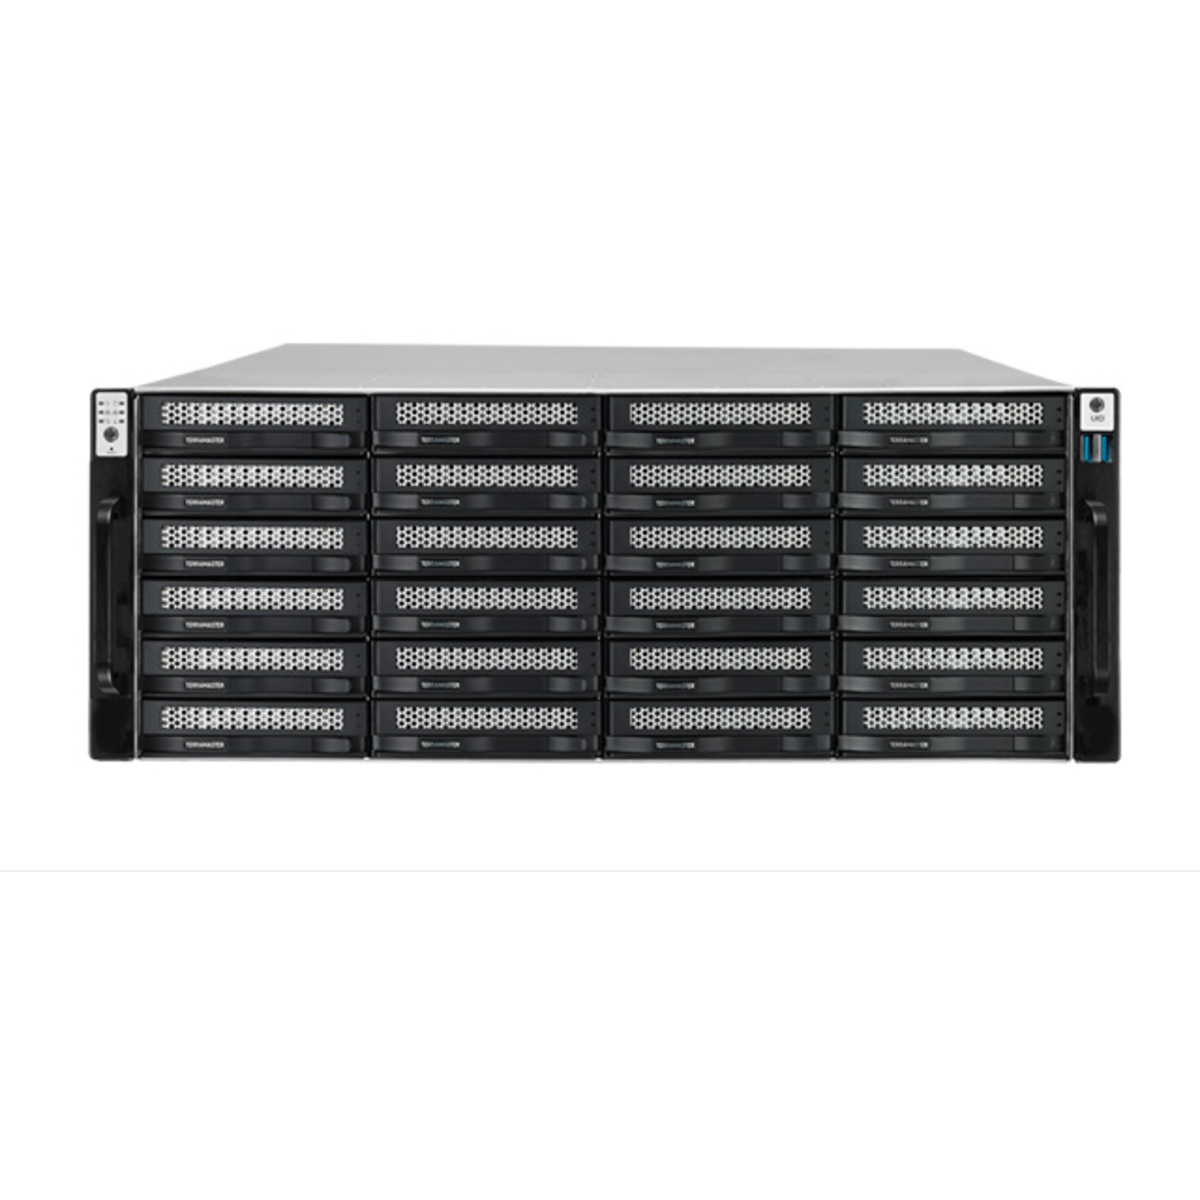 TerraMaster U24-722-2224 380tb 24-Bay RackMount Large Business / Enterprise NAS - Network Attached Storage Device 19x20tb Seagate EXOS X20 ST20000NM007D 3.5 7200rpm SATA 6Gb/s HDD ENTERPRISE Class Drives Installed - Burn-In Tested U24-722-2224